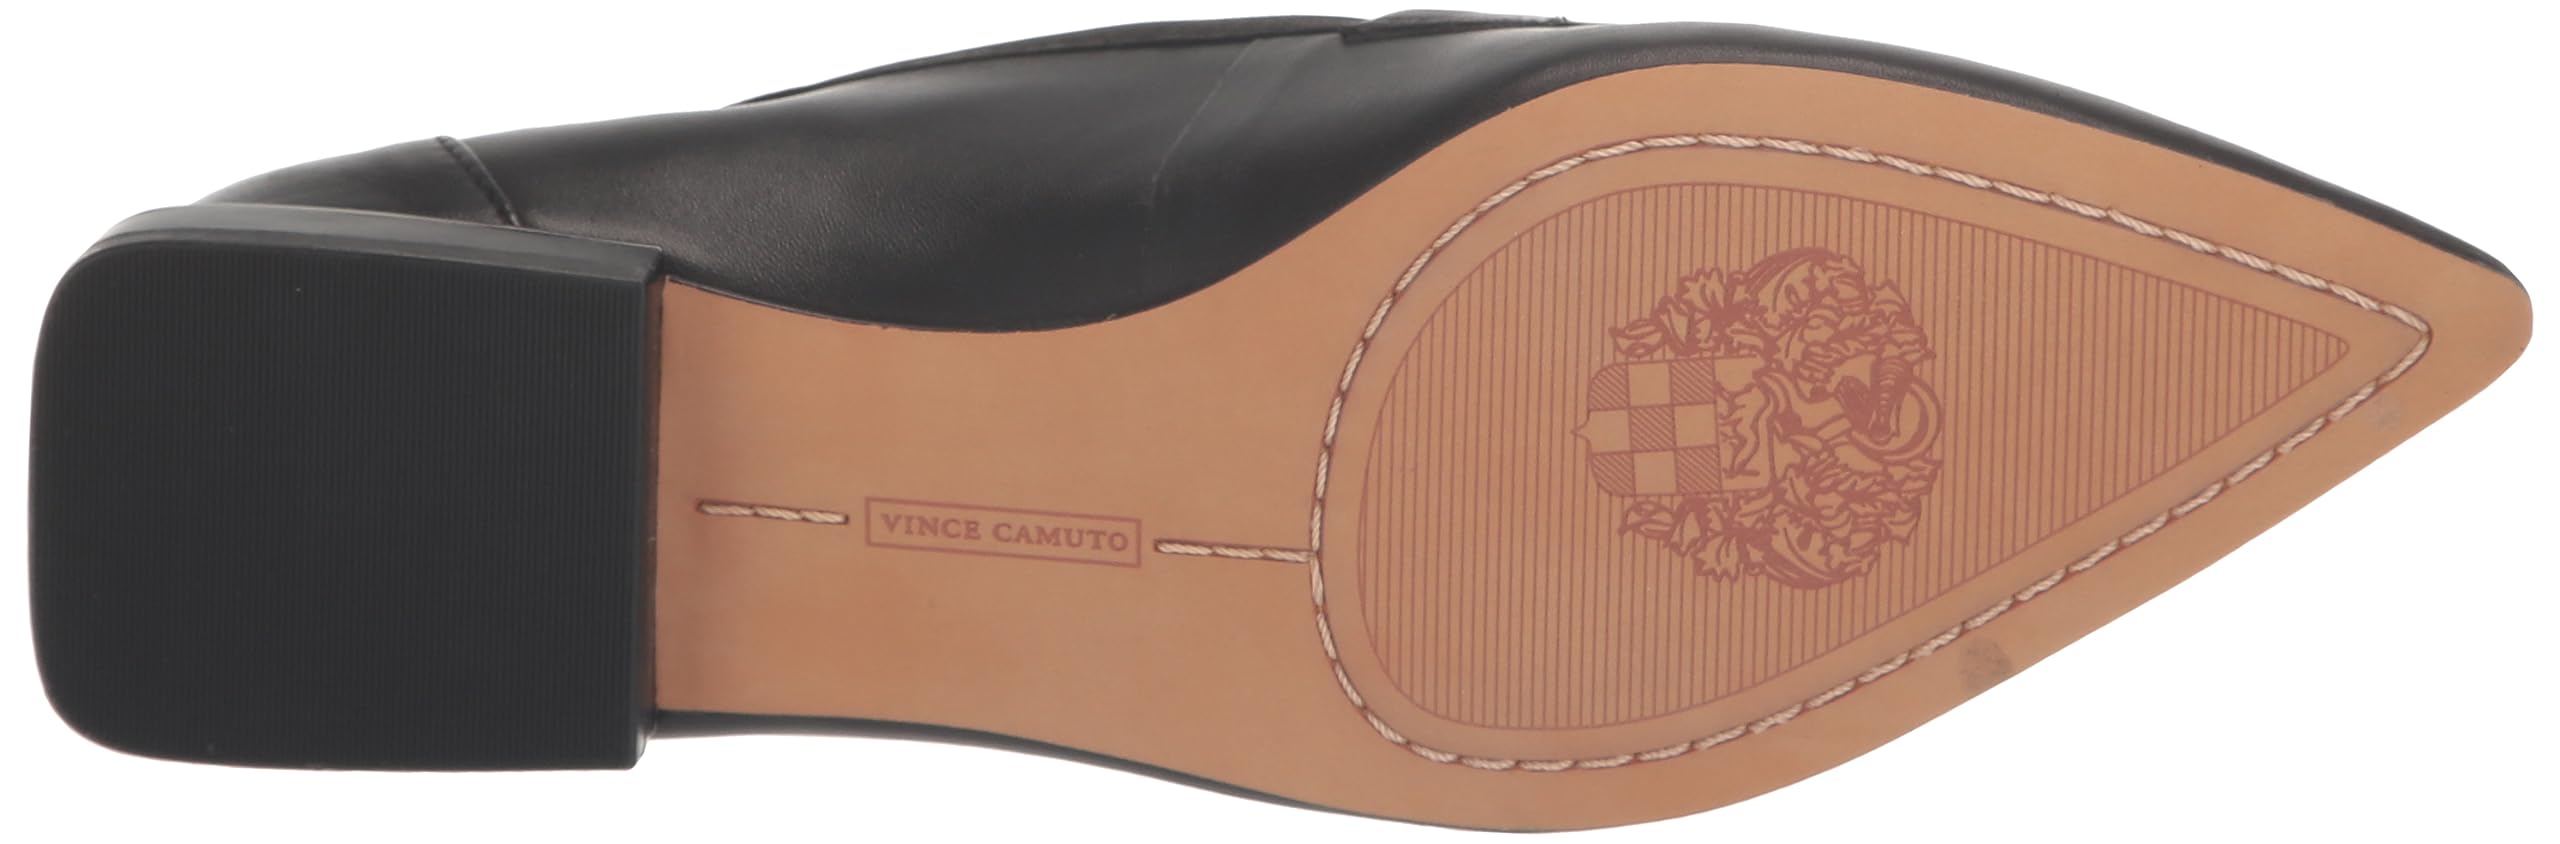 Vince Camuto Women's Calentha Casual Loafer Flat